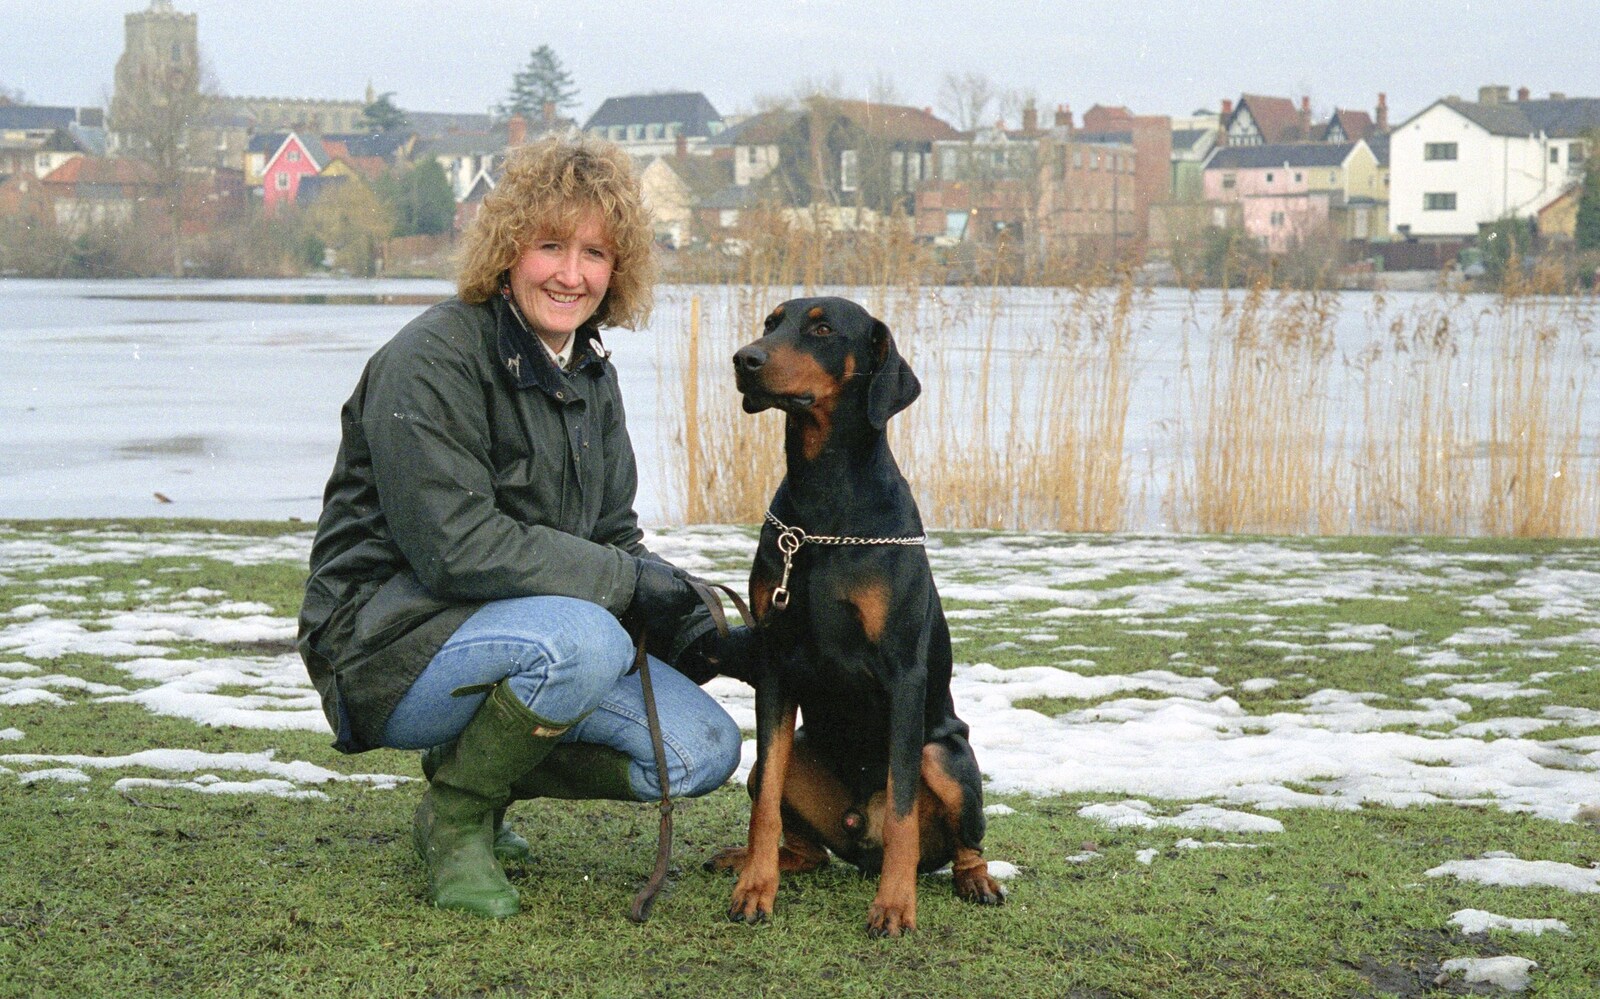 Another dog pose in front of the Mere from The Newmarket Dog Show and Dobermans on the Ling, Newmarket and Wortham, Suffolk - 3rd April 1991